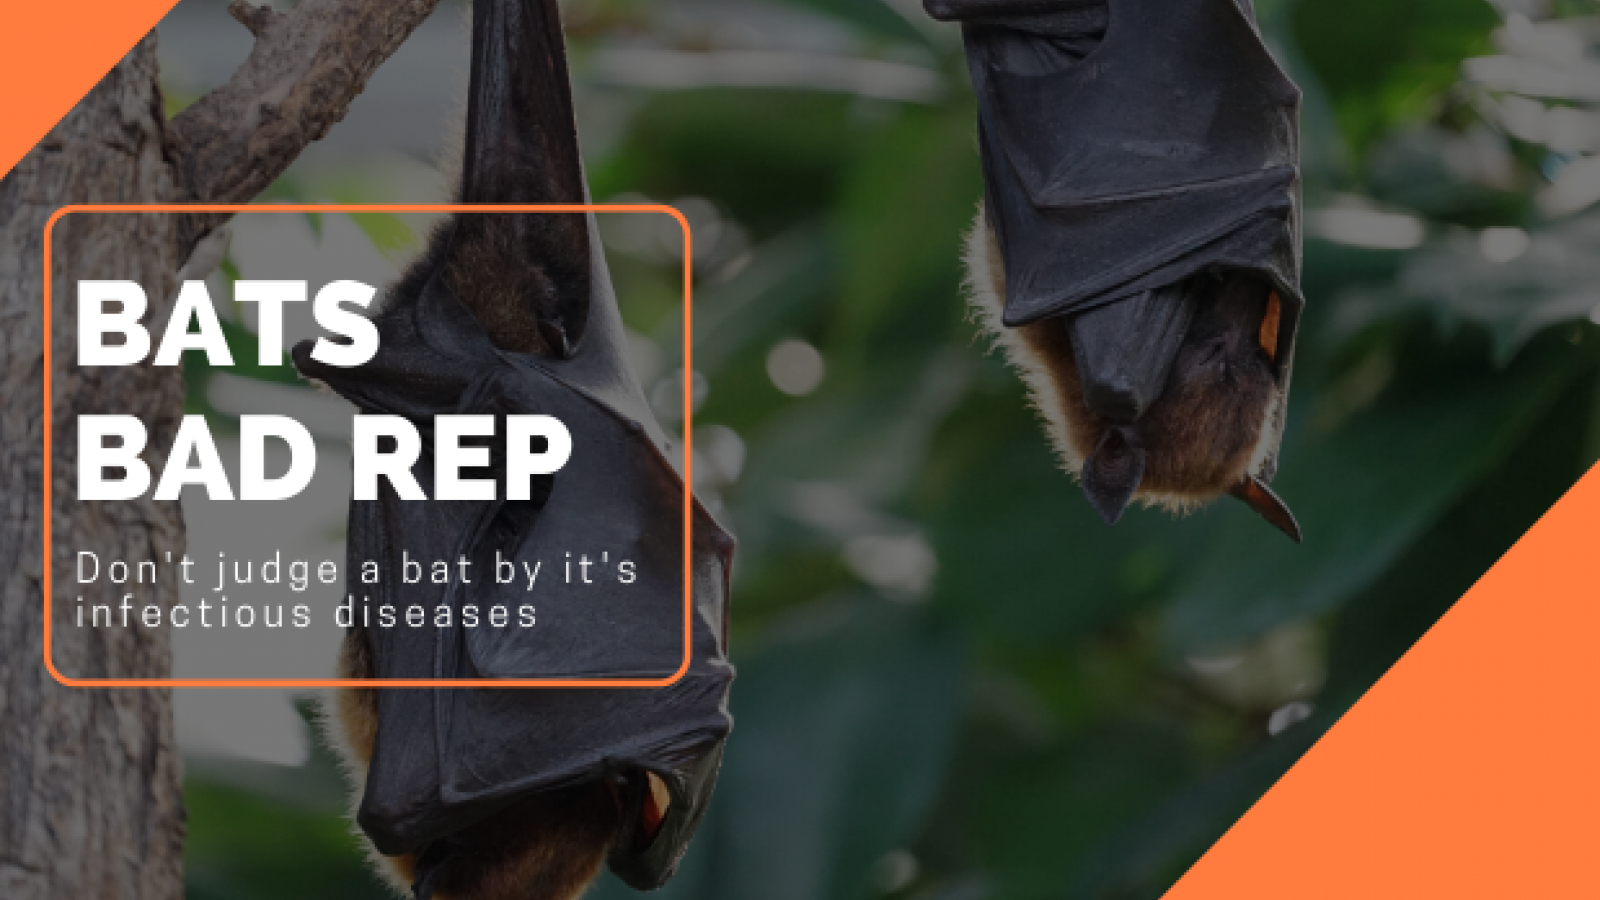 Why do bats have such a bad reputation? :: Understanding Animal Research